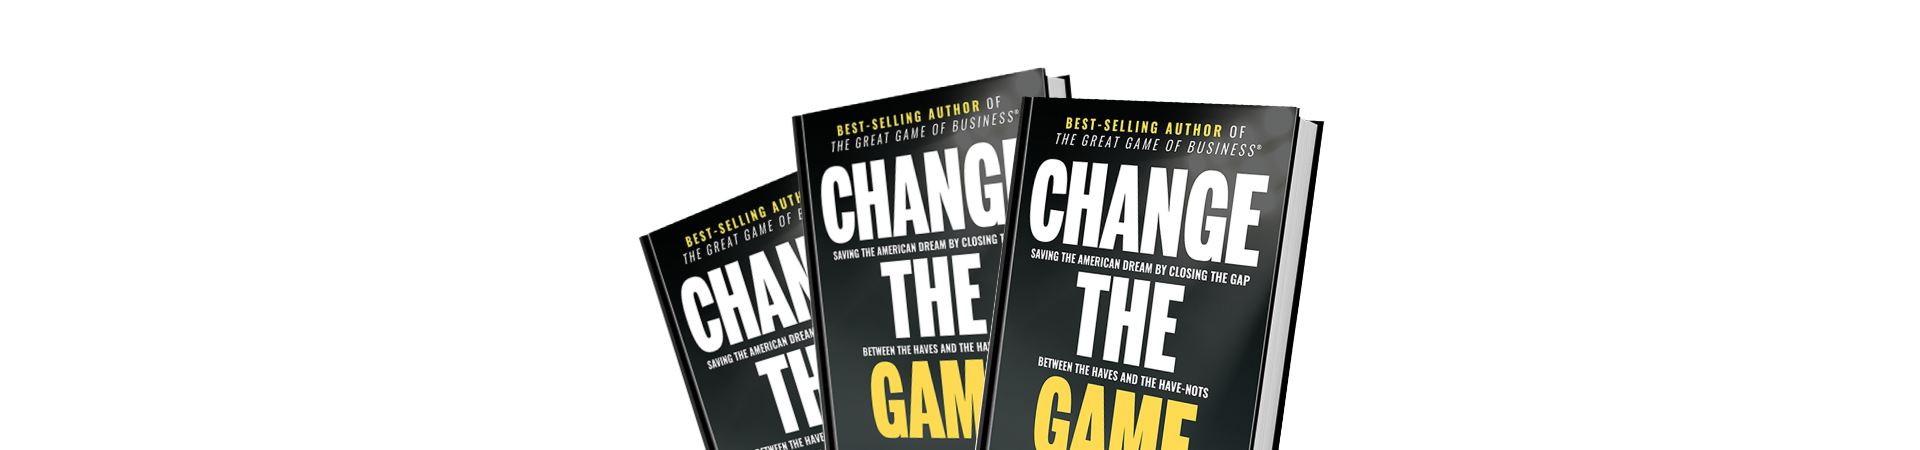 Change the Game books-no background